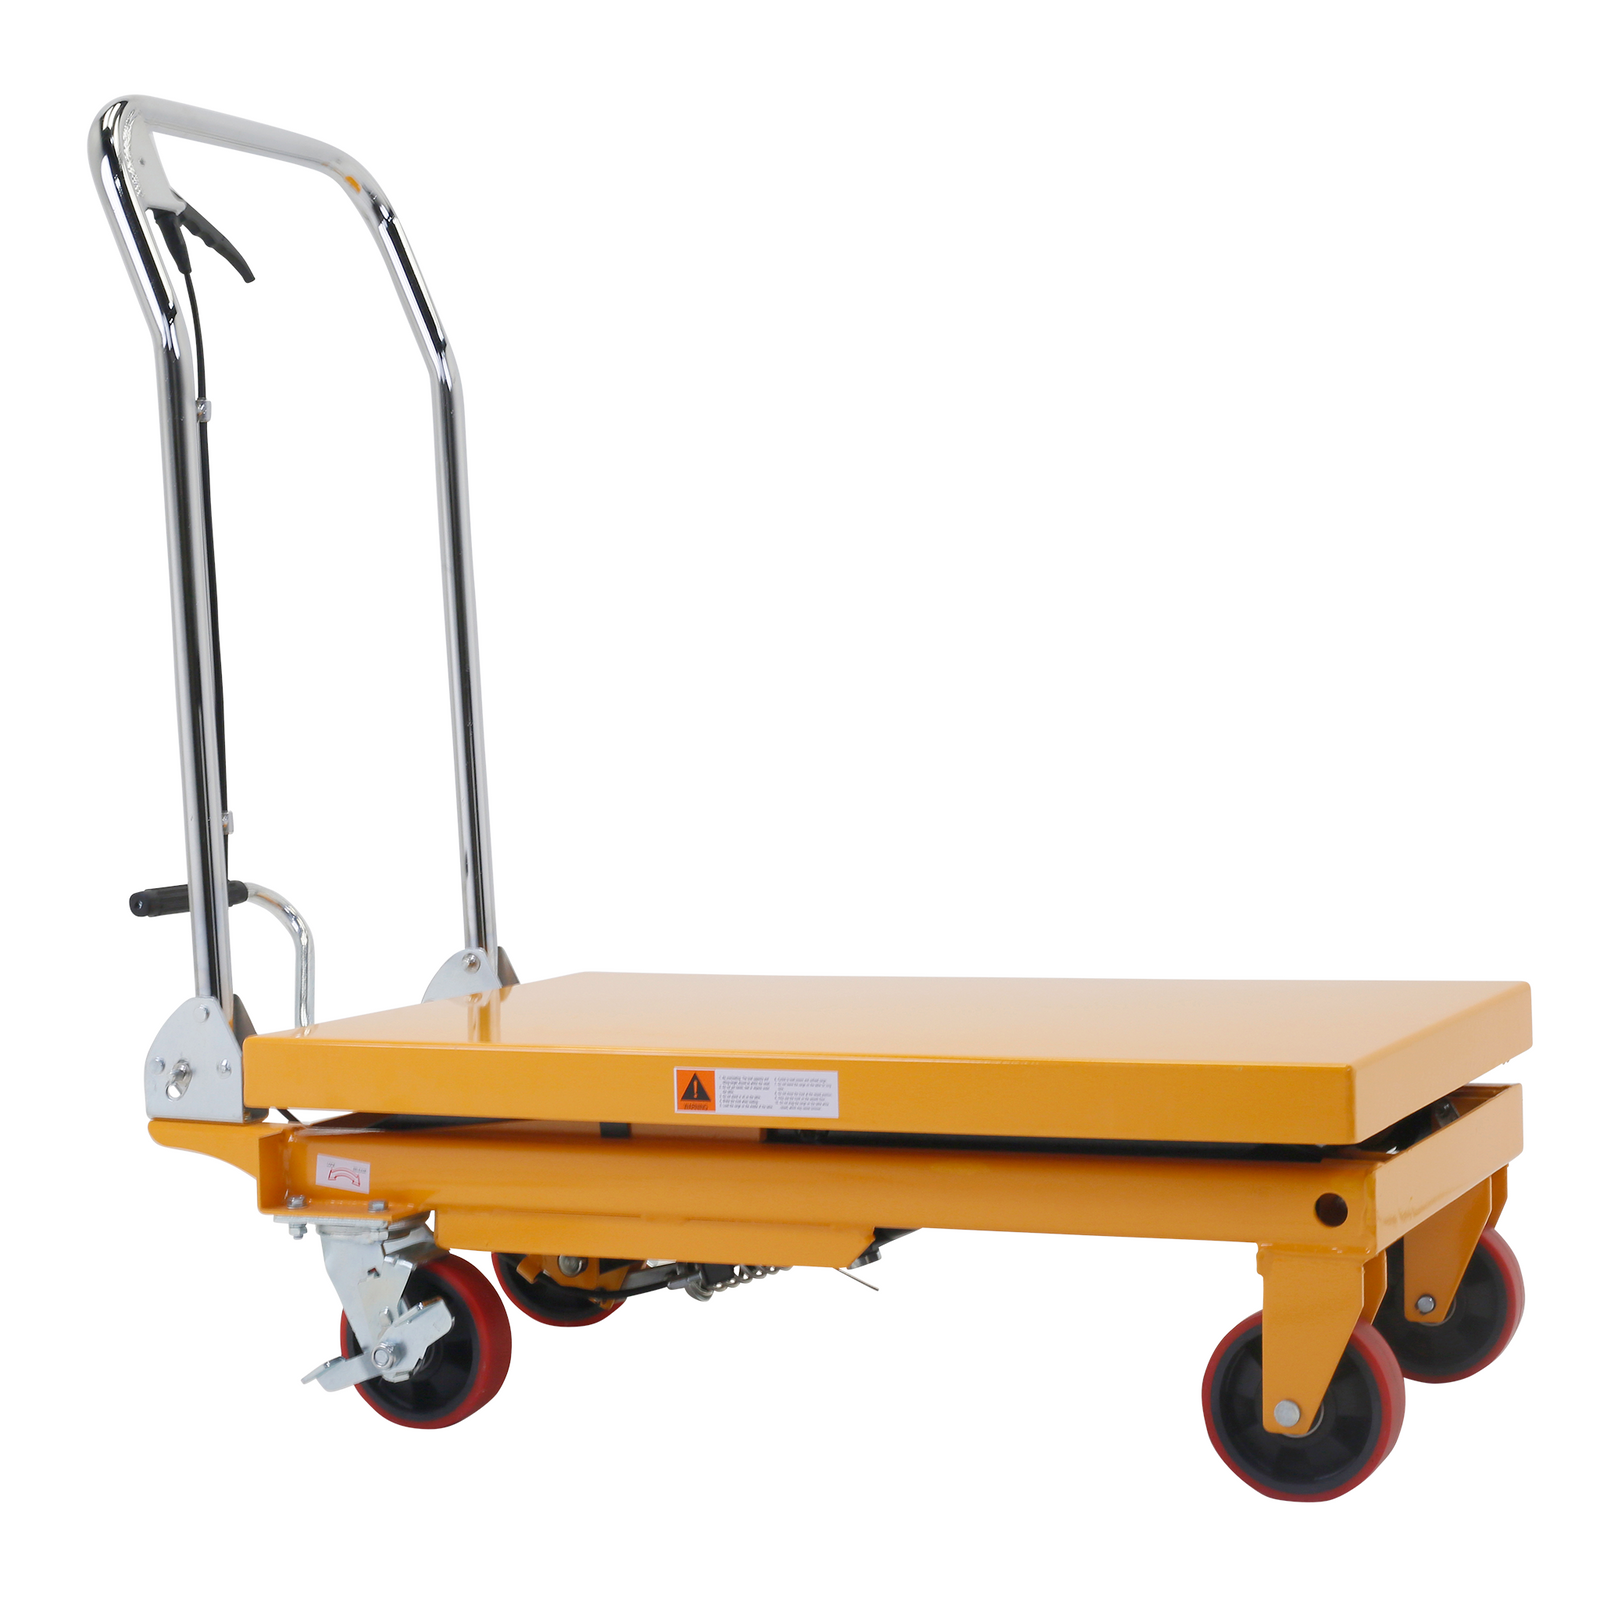 Black and yellow hydraulic table lift for 300 Kg. The table is completely collapsed.